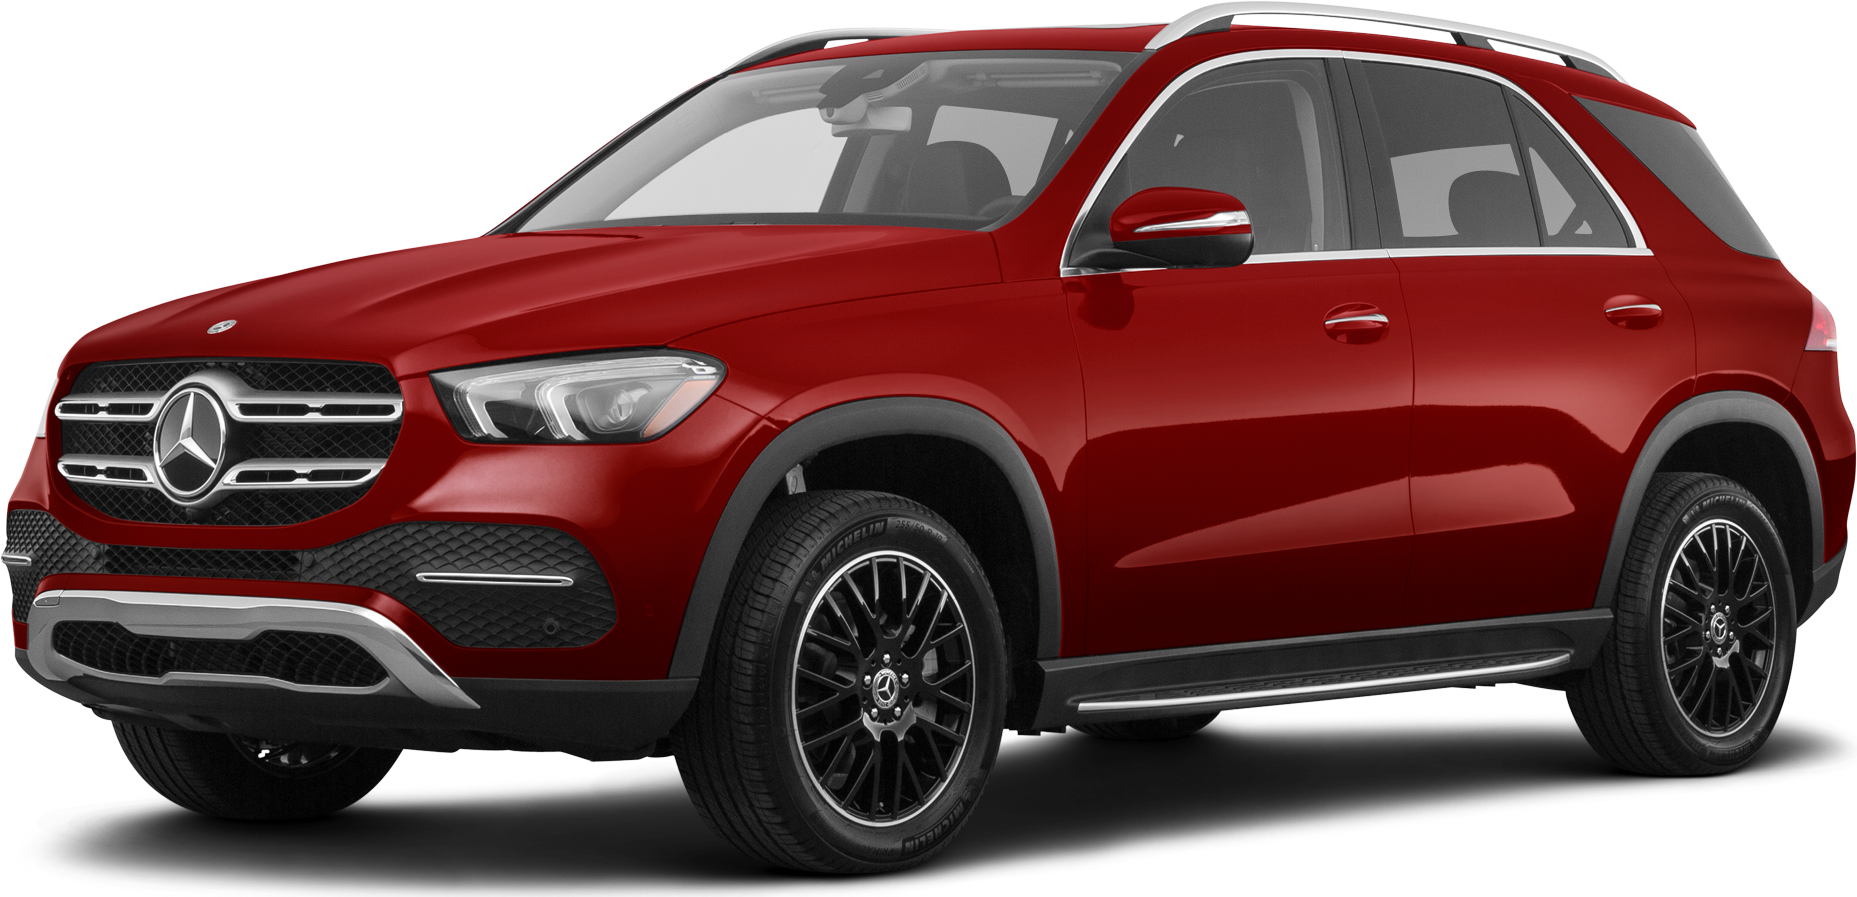 21 Mercedes Benz Gle Reviews Pricing Specs Kelley Blue Book